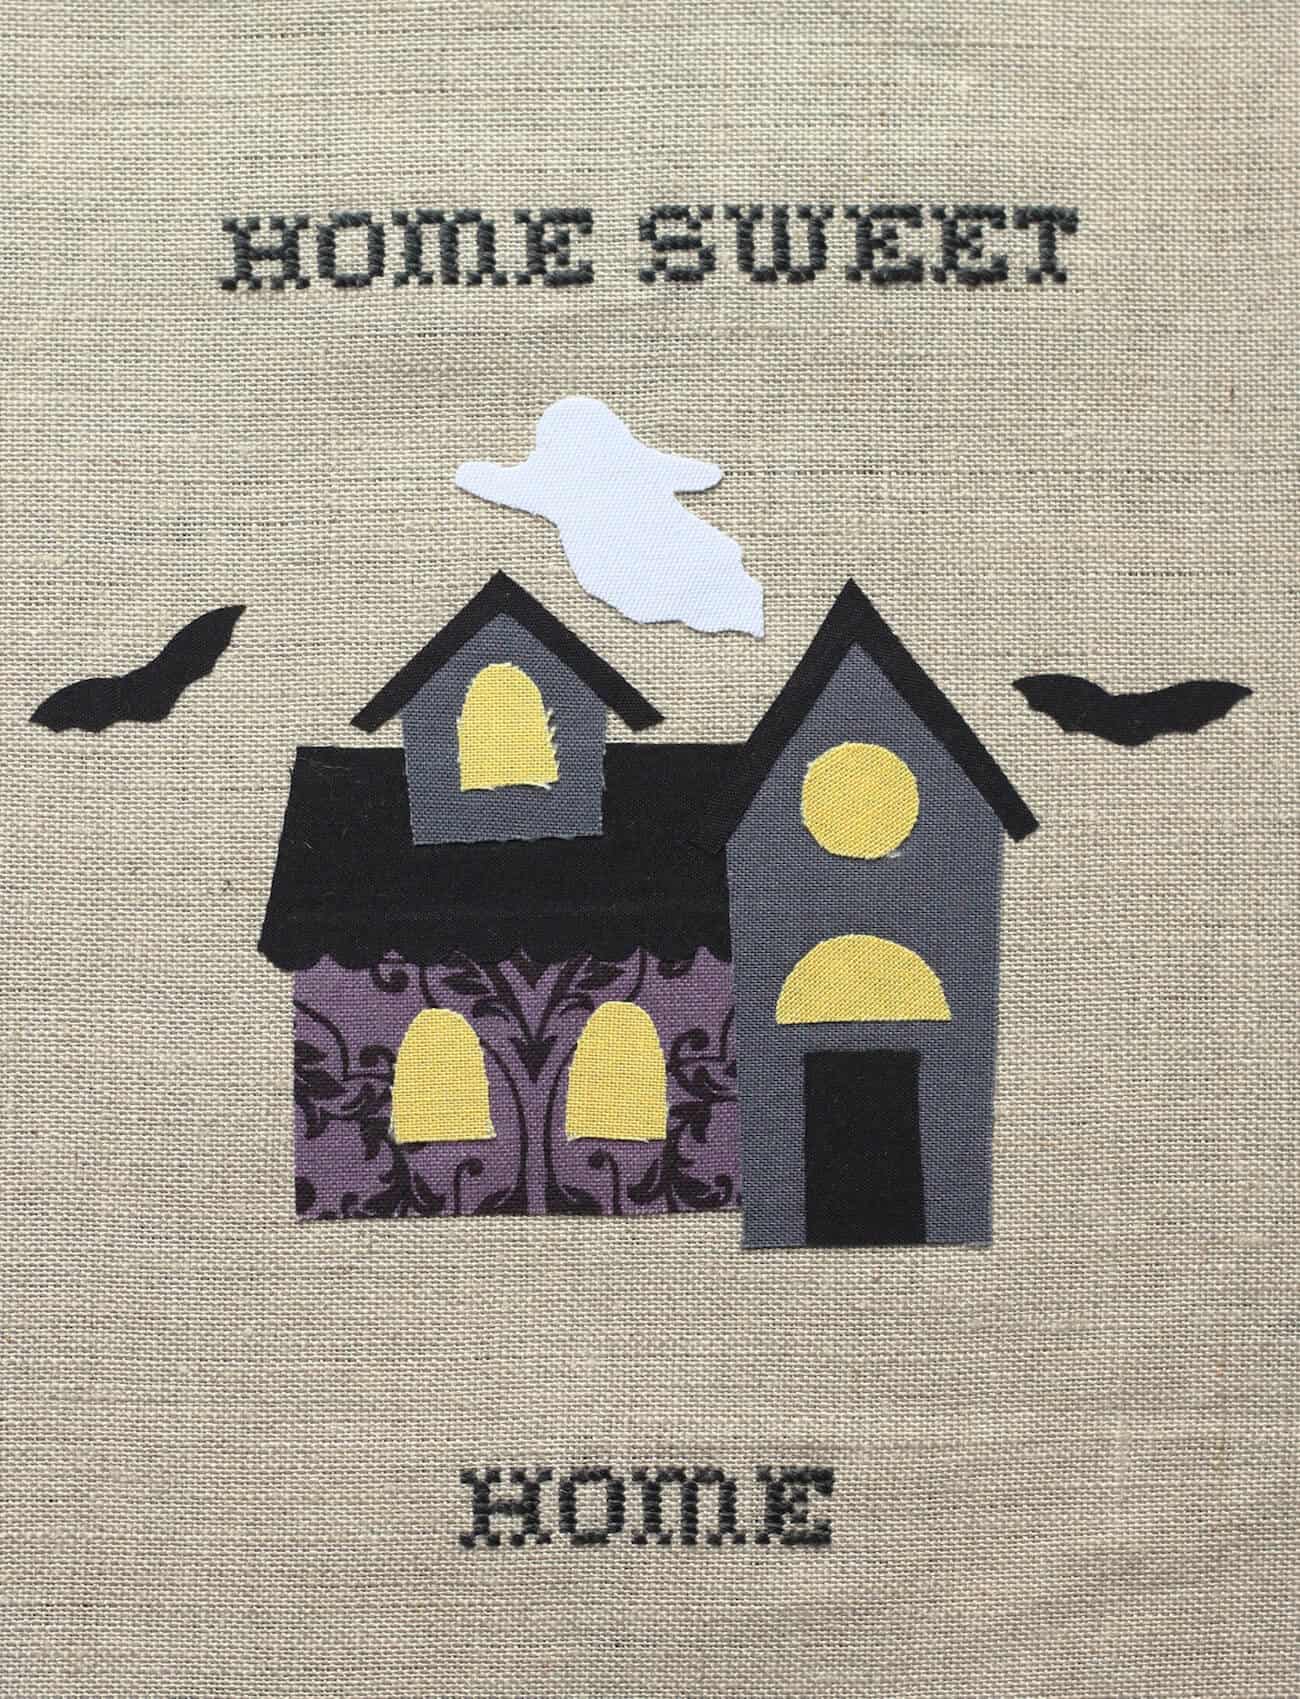 Learn to make this cute "Home Sweet (Haunted) Home" Halloween embroidery wall hanging - and use up your fabric scraps. Get a free pattern too!